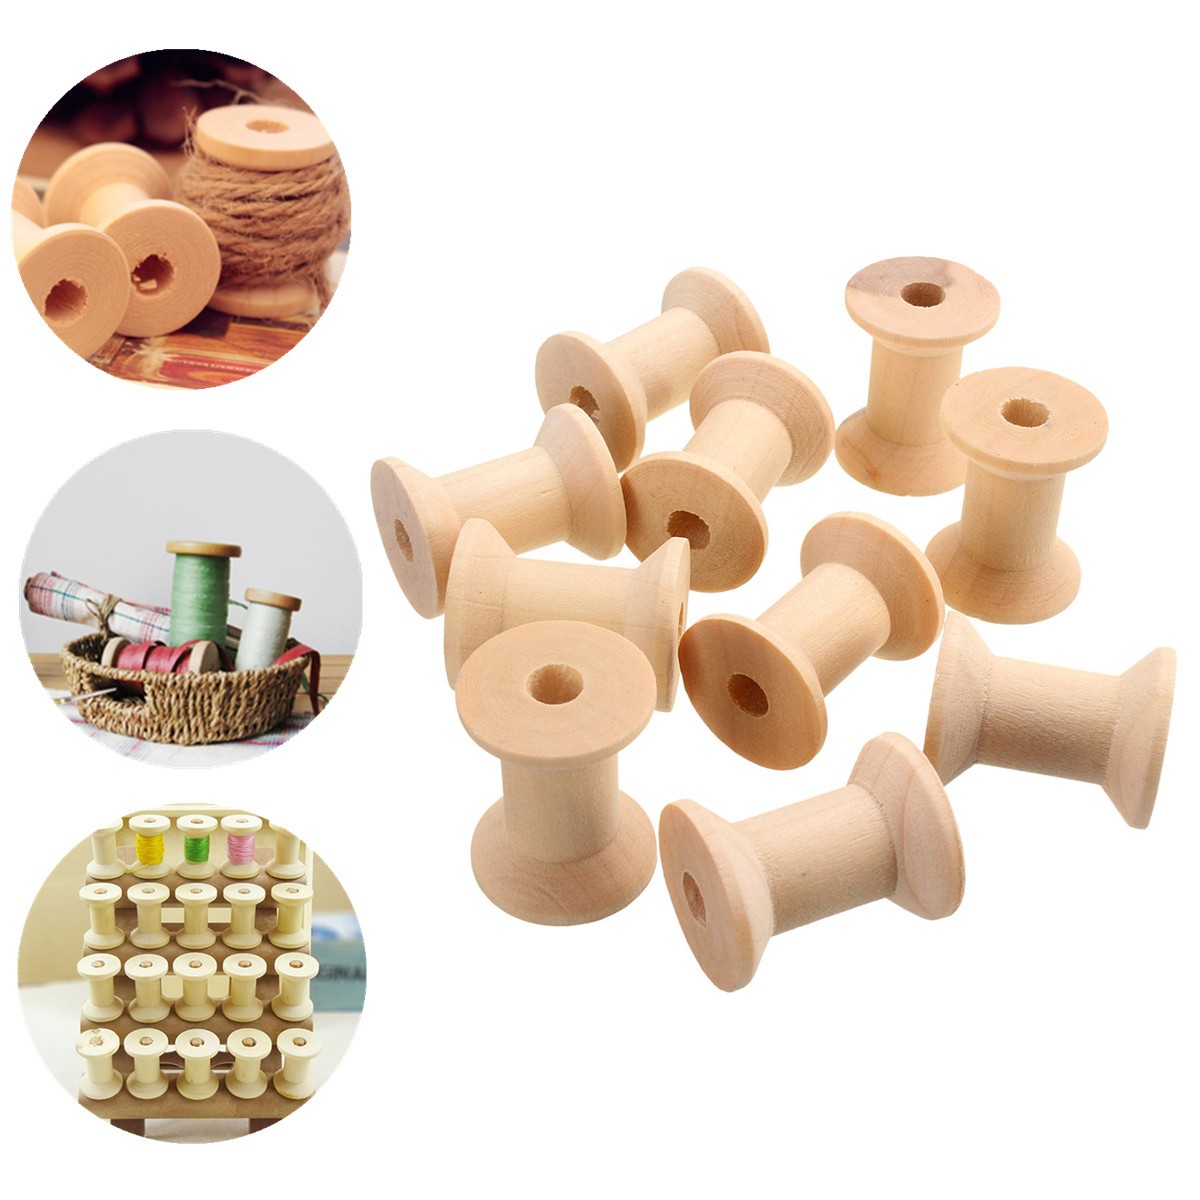 

10Pcs Vintage Style Wooden Bobbins Spools Reels For Sewing Ribbons Twine Crafts